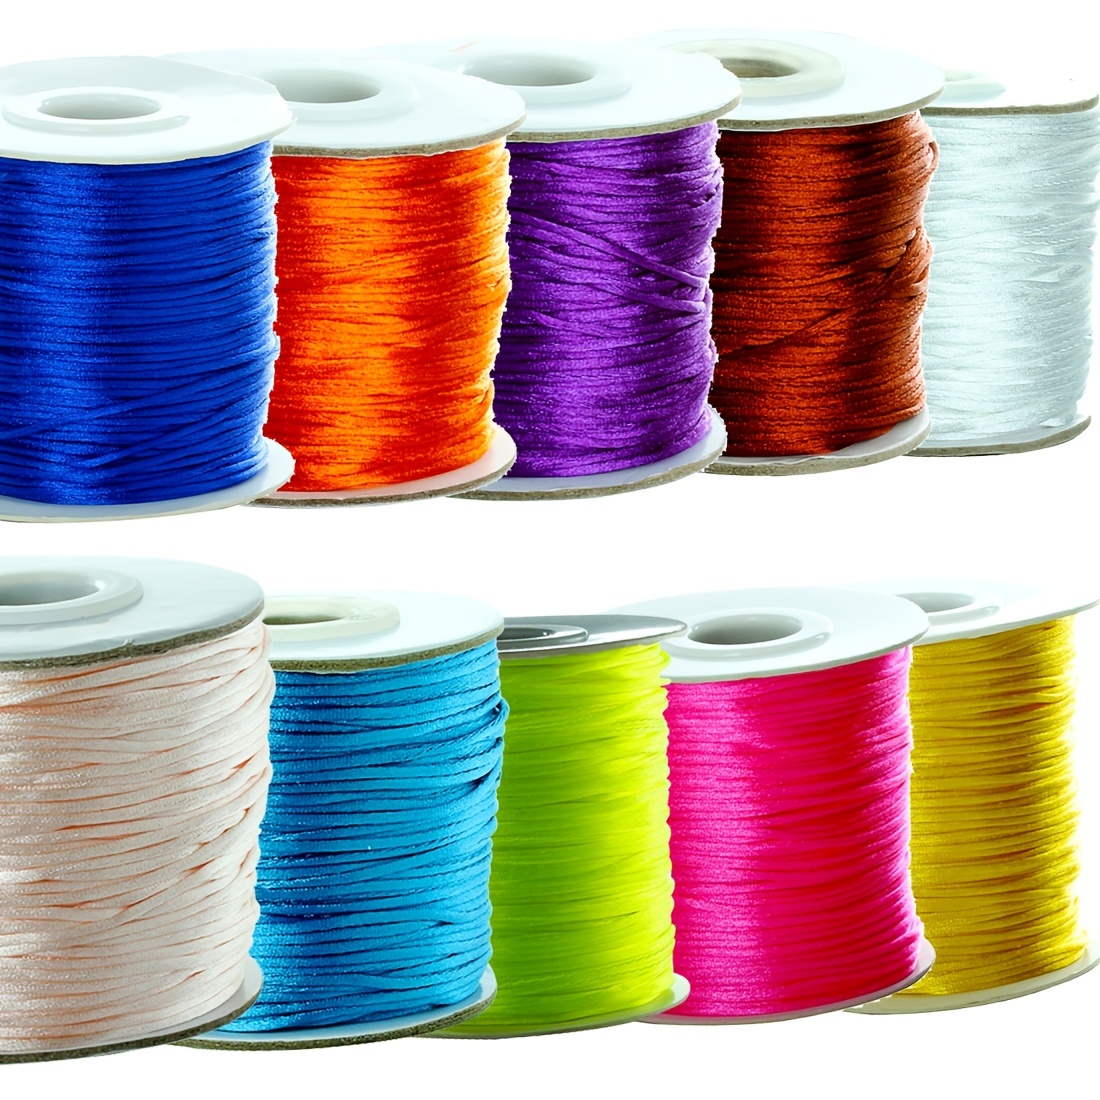 4 Packs Metallic Craft Cord Jewelry Making Thread Gift Wrapping String 80 Yards